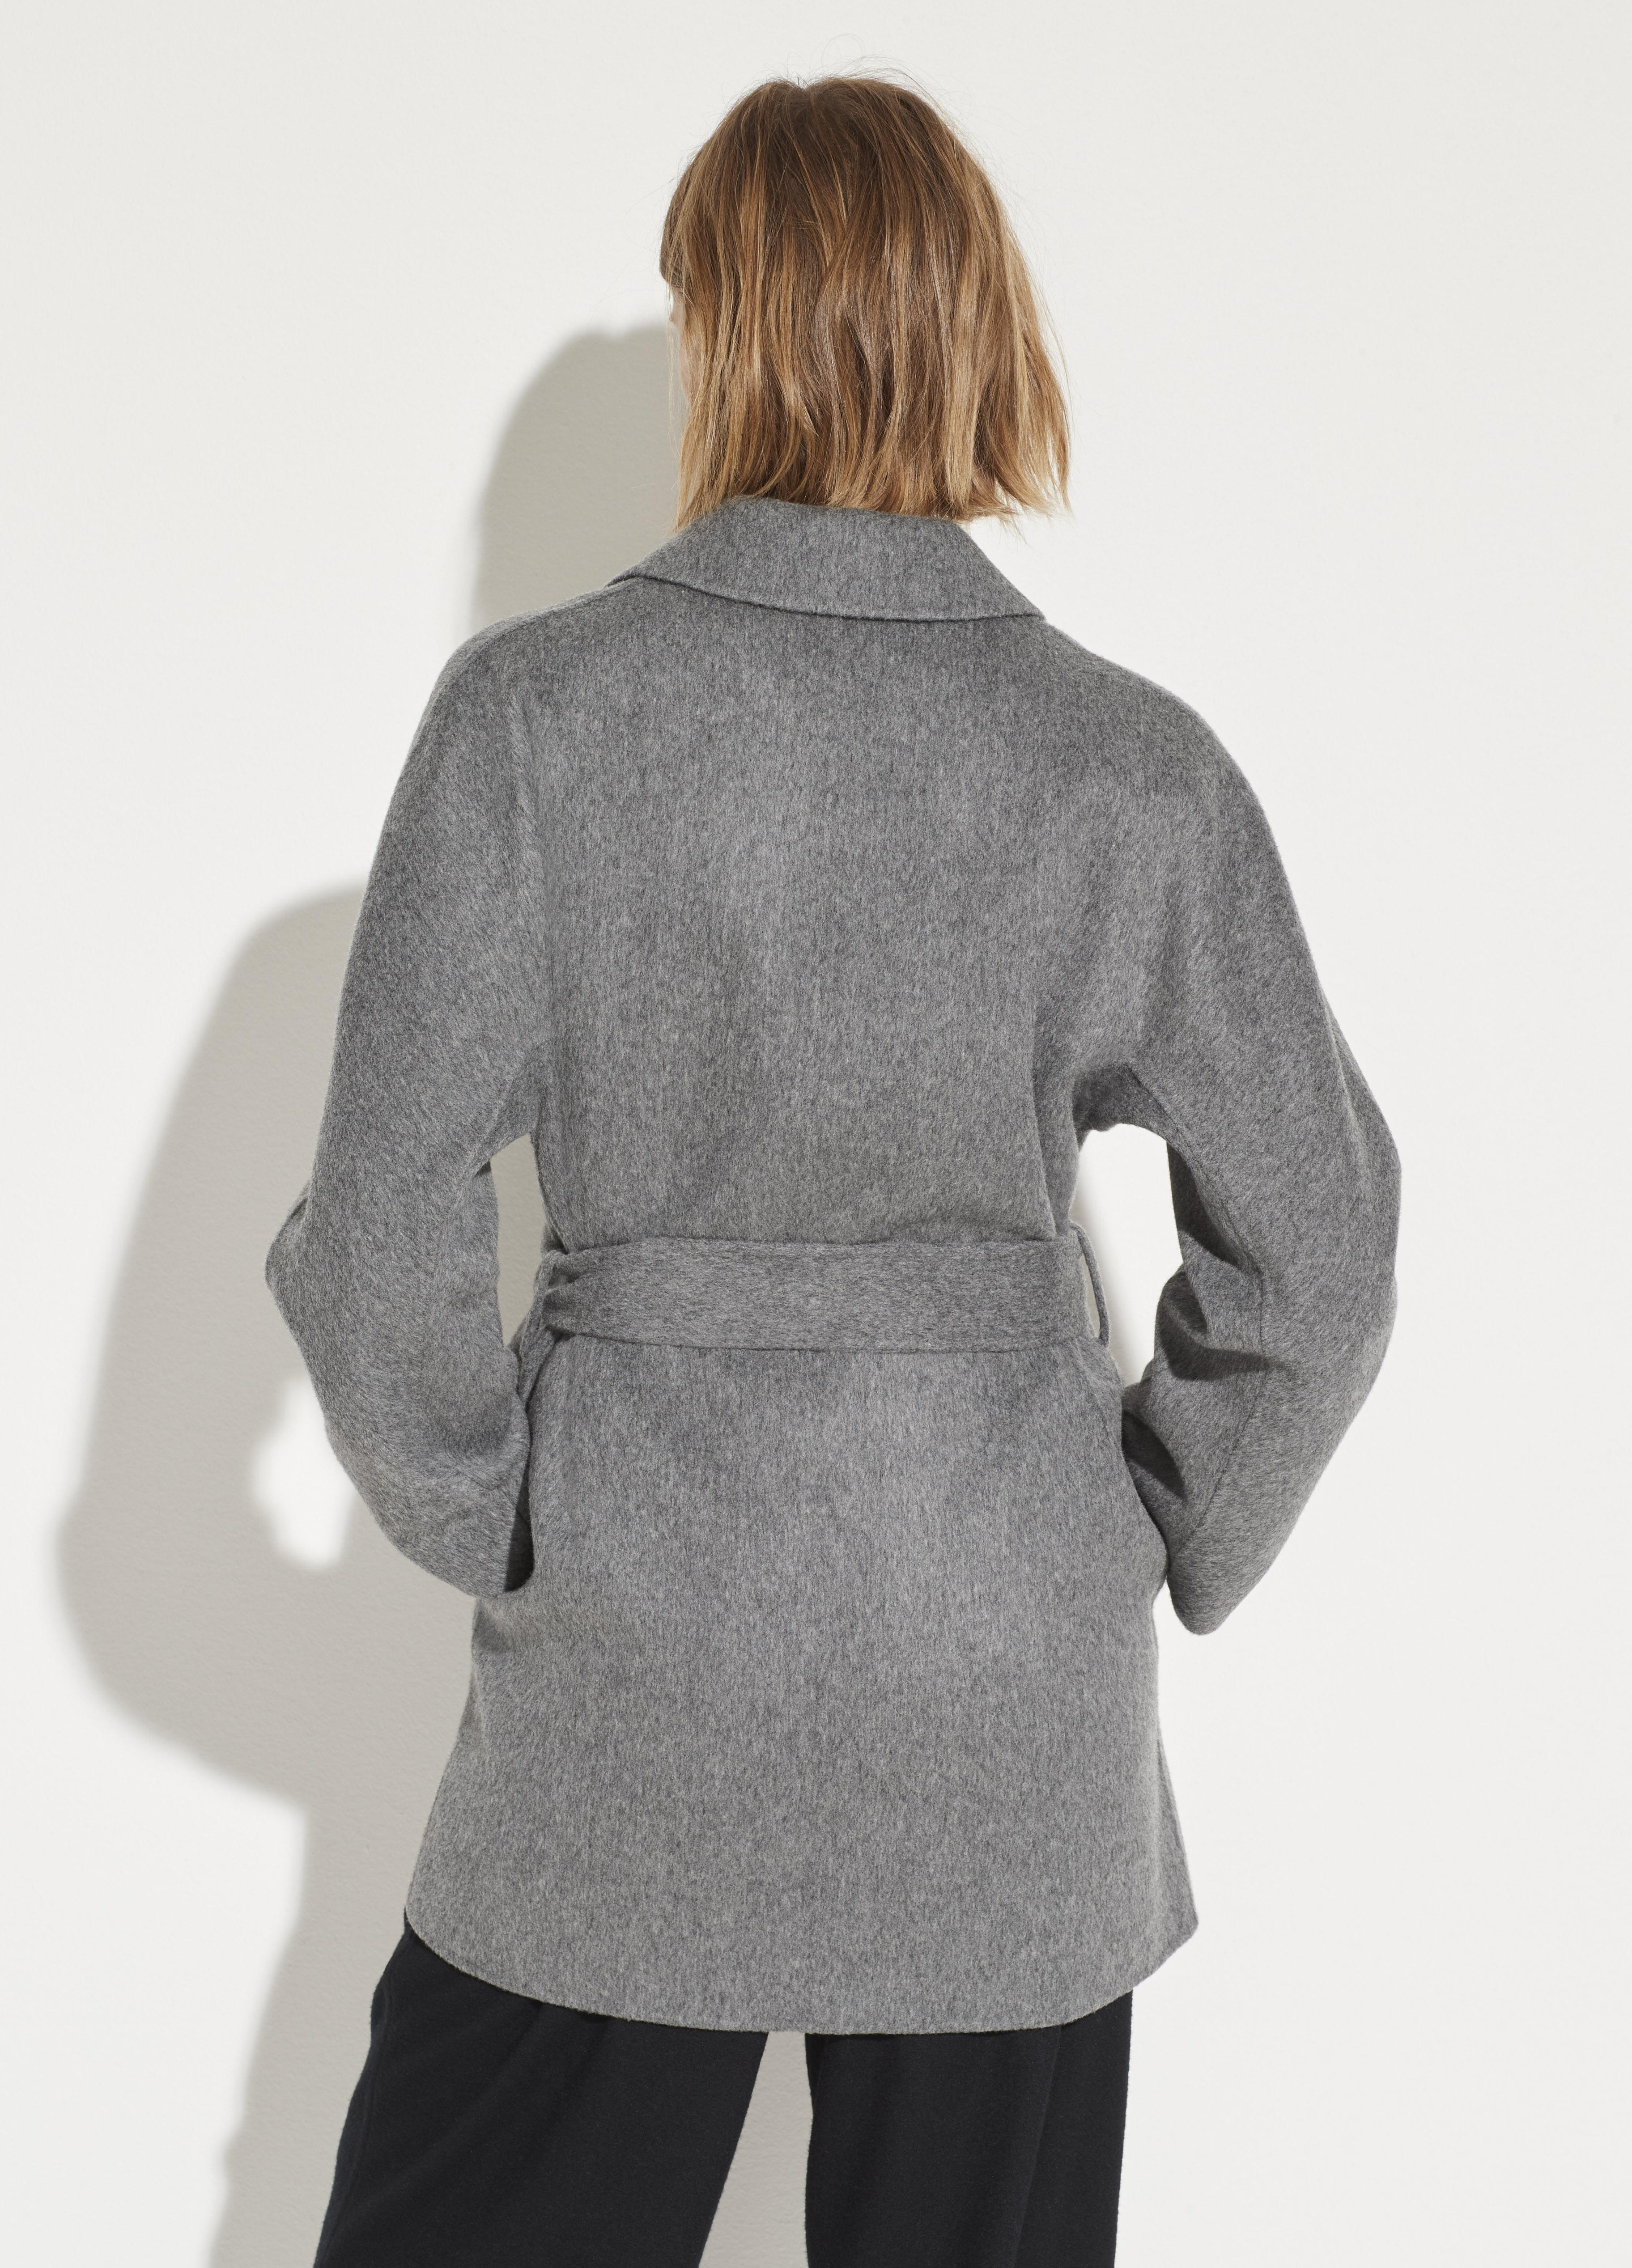 Vince Belted Wool Cardigan Coat in Gray - Lyst